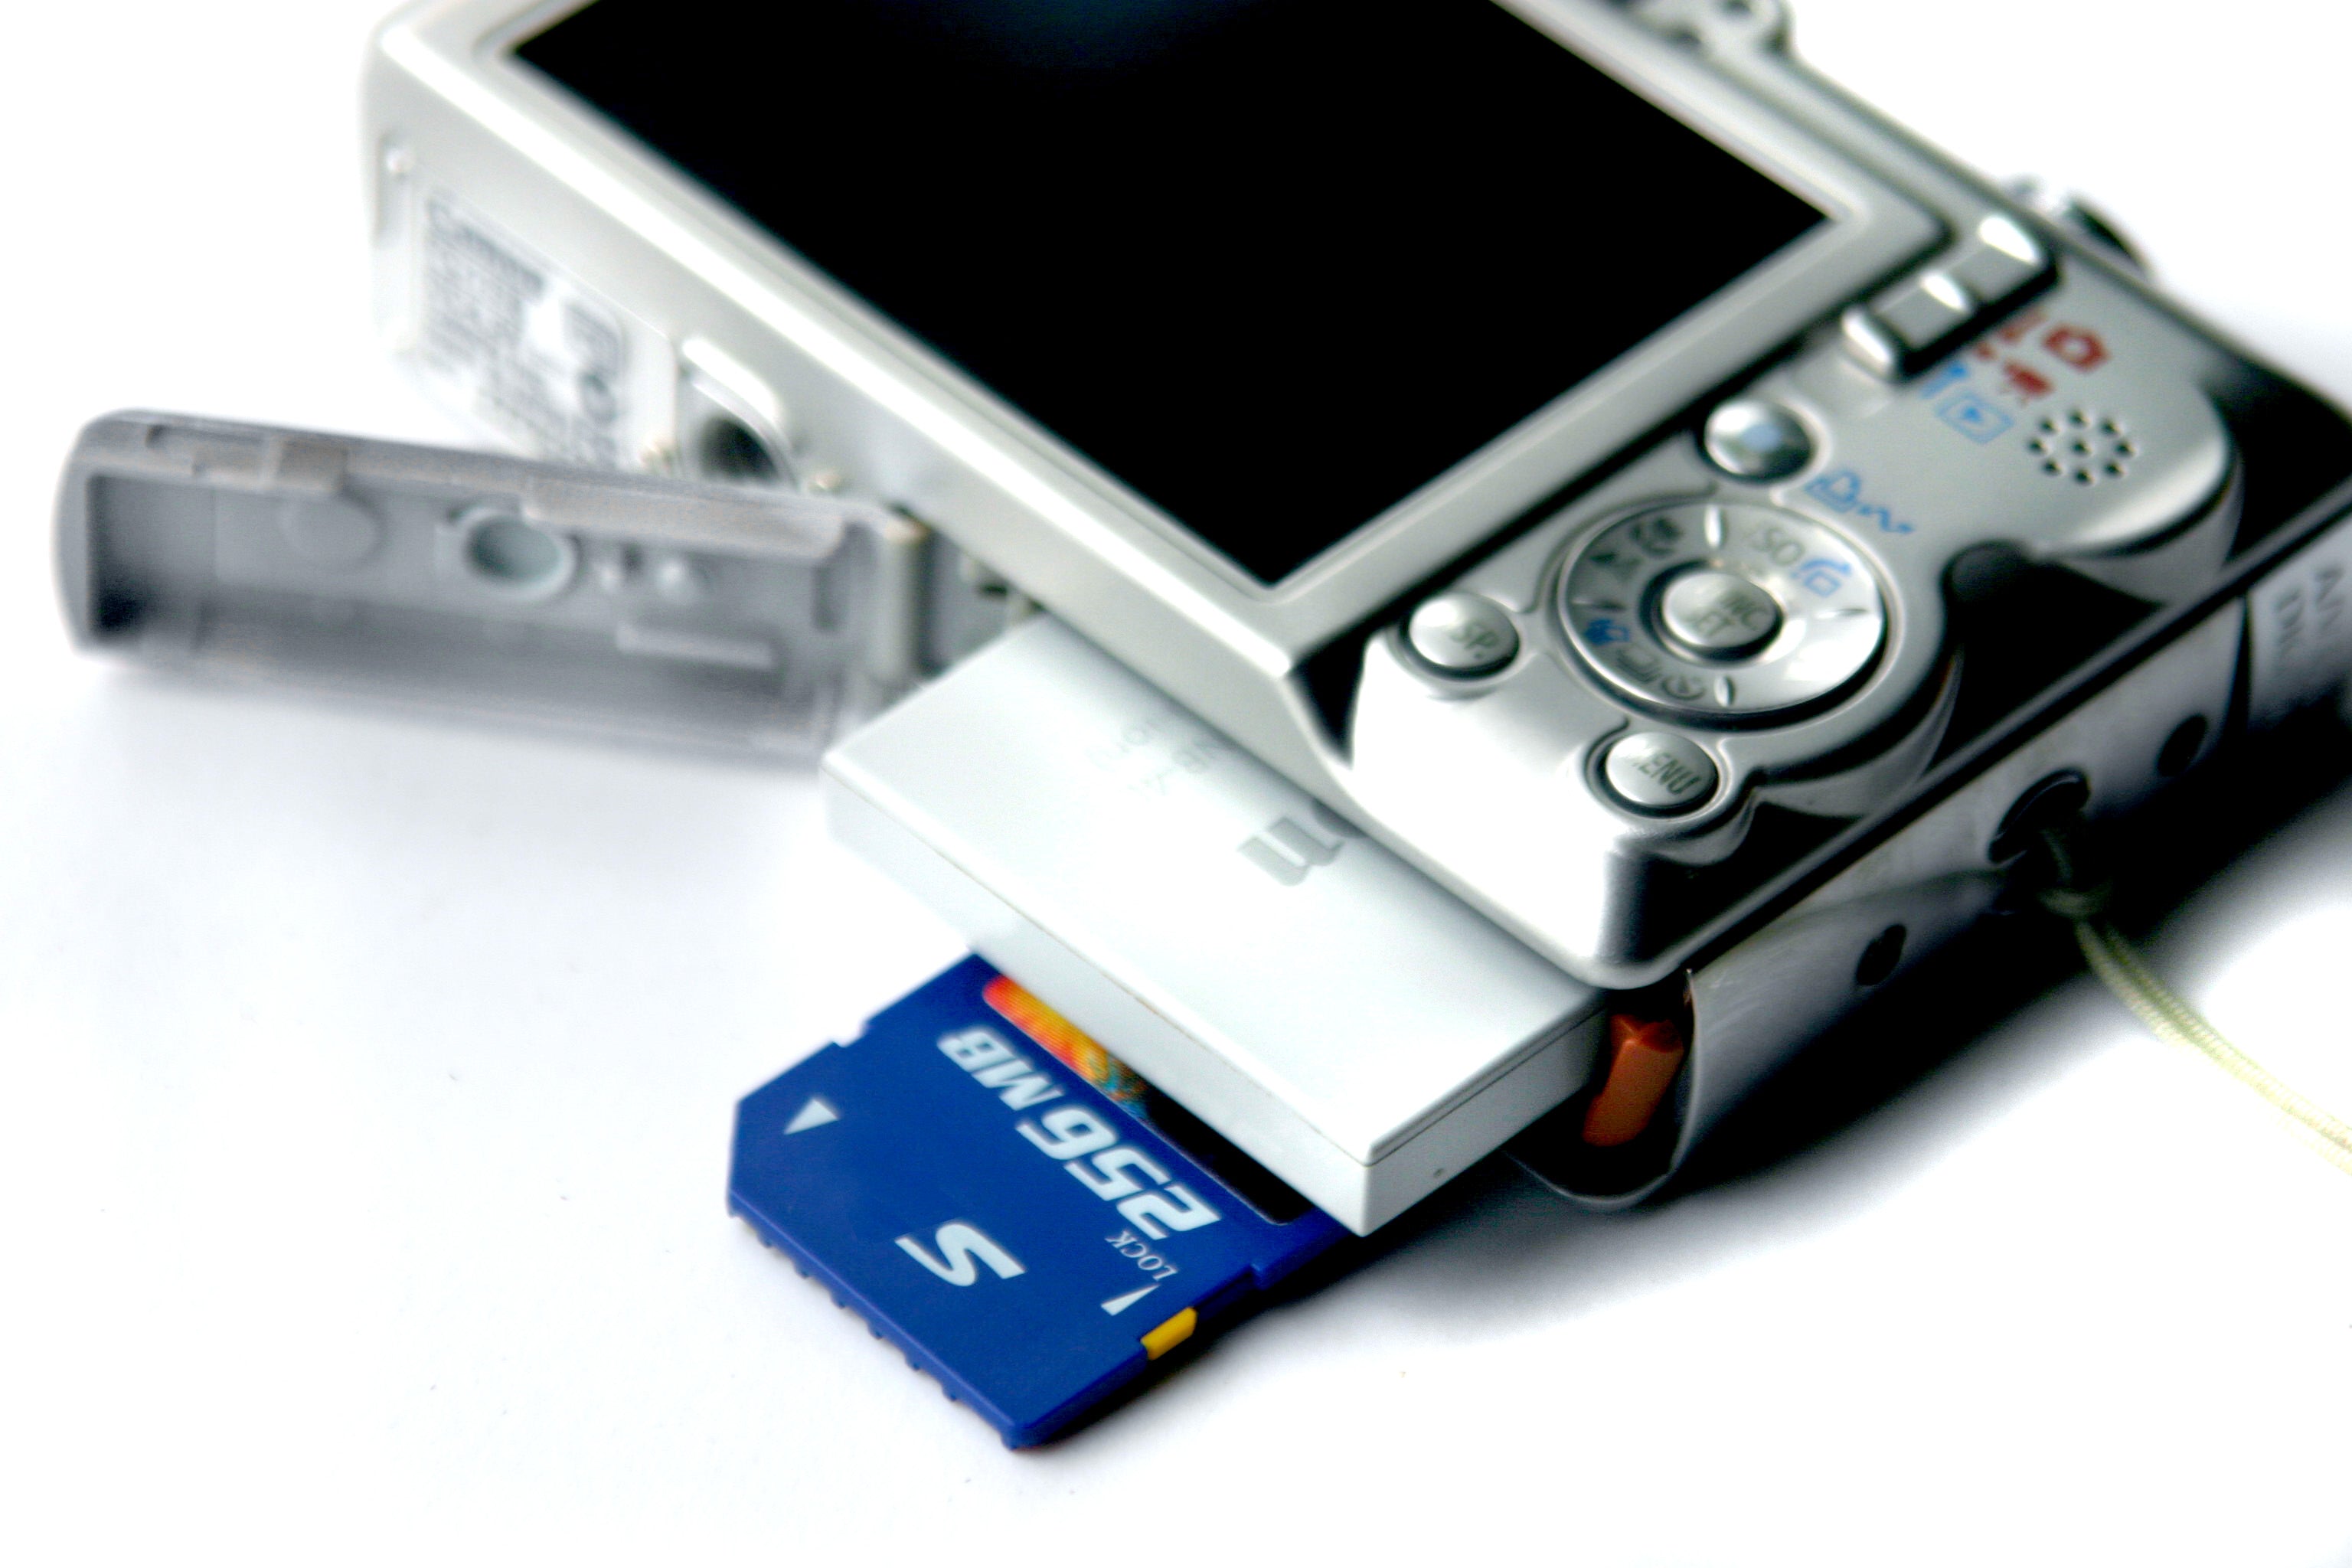 Digital camera with battery and memory card